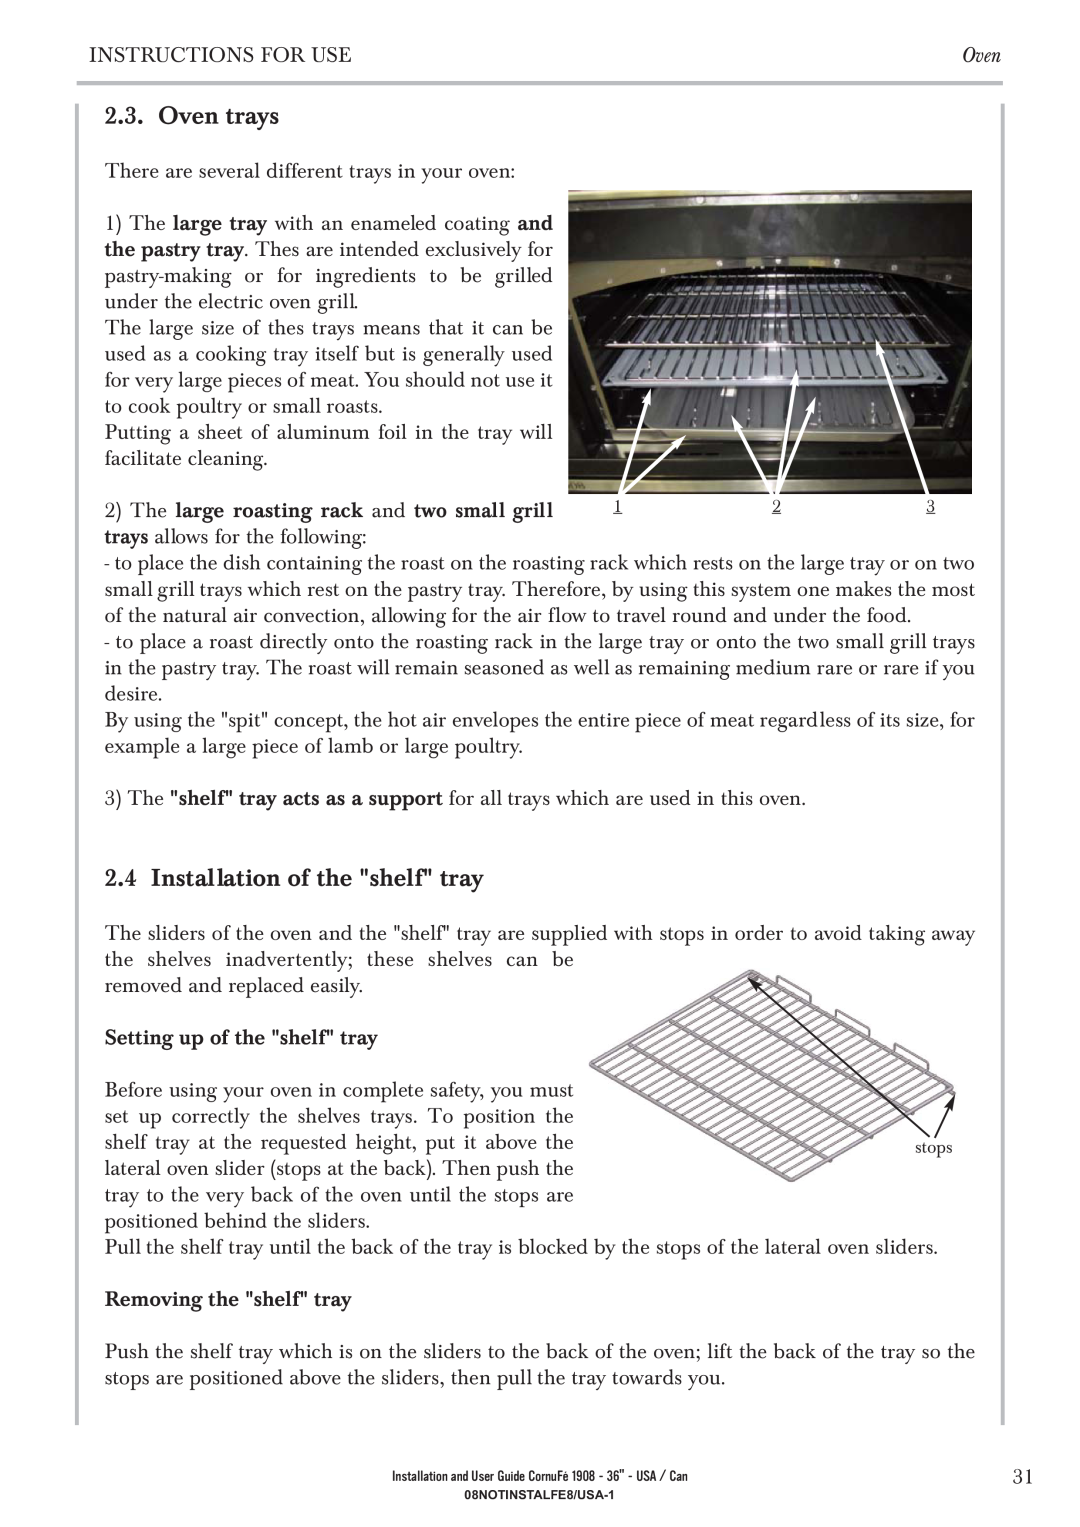 GE 1908 - 36 manual Oven trays, Installation of the shelf tray 